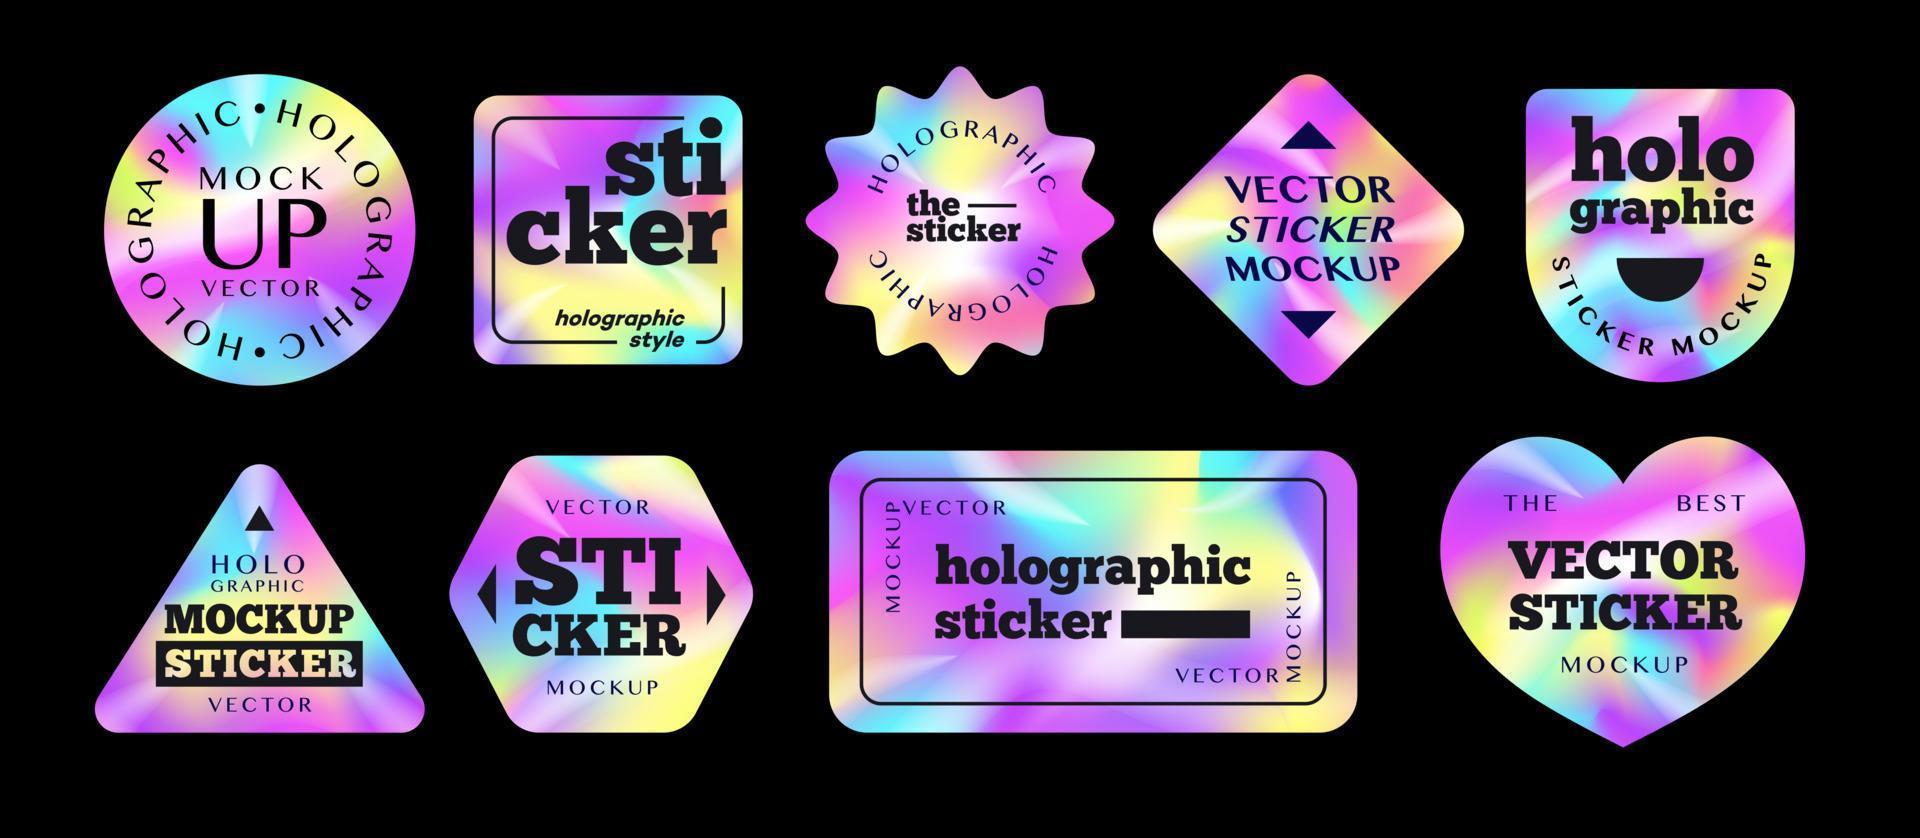 How To Print Holographic stickers